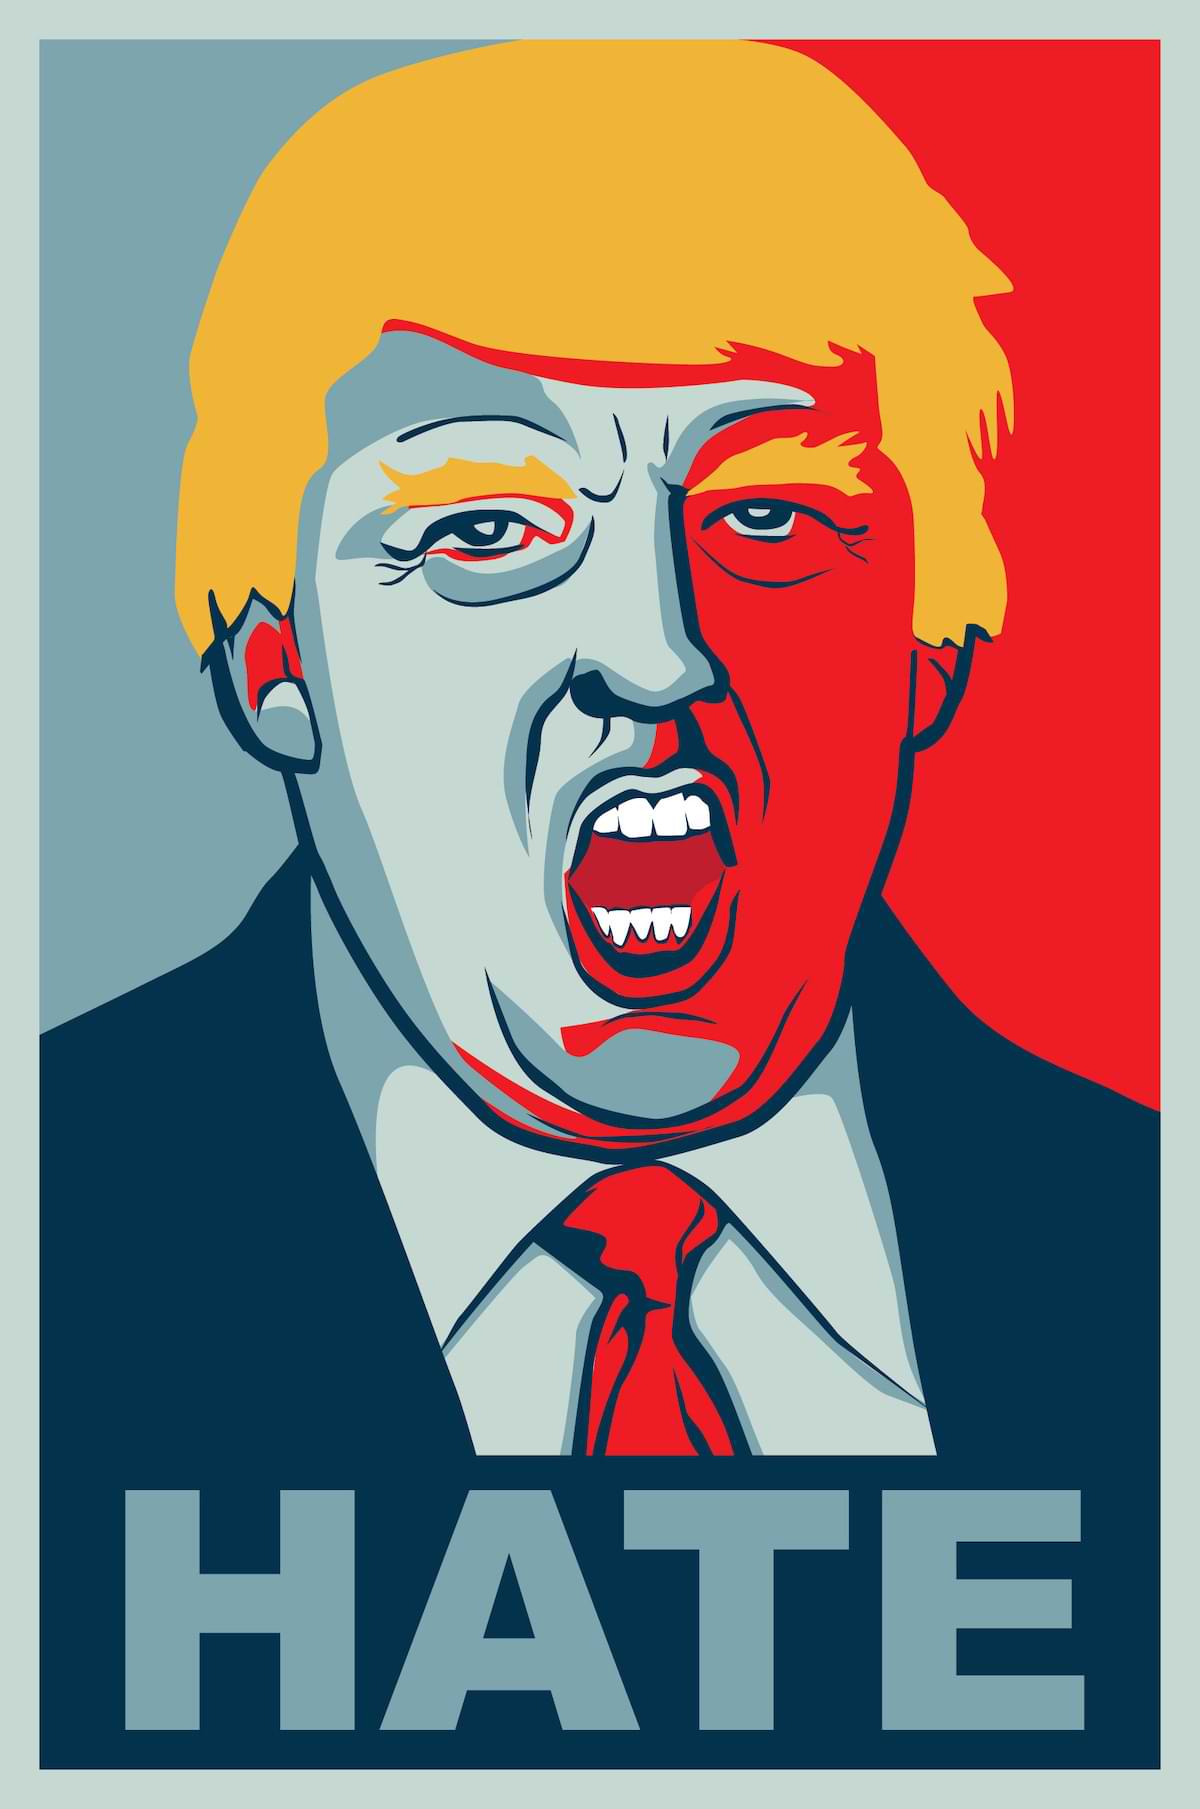 A Trumpicon depicting Donald Trump with bright yellow hair and mouth agape. The caption beneath Trump’s portrait is the word Hate. Color palette is red, white, and blue.